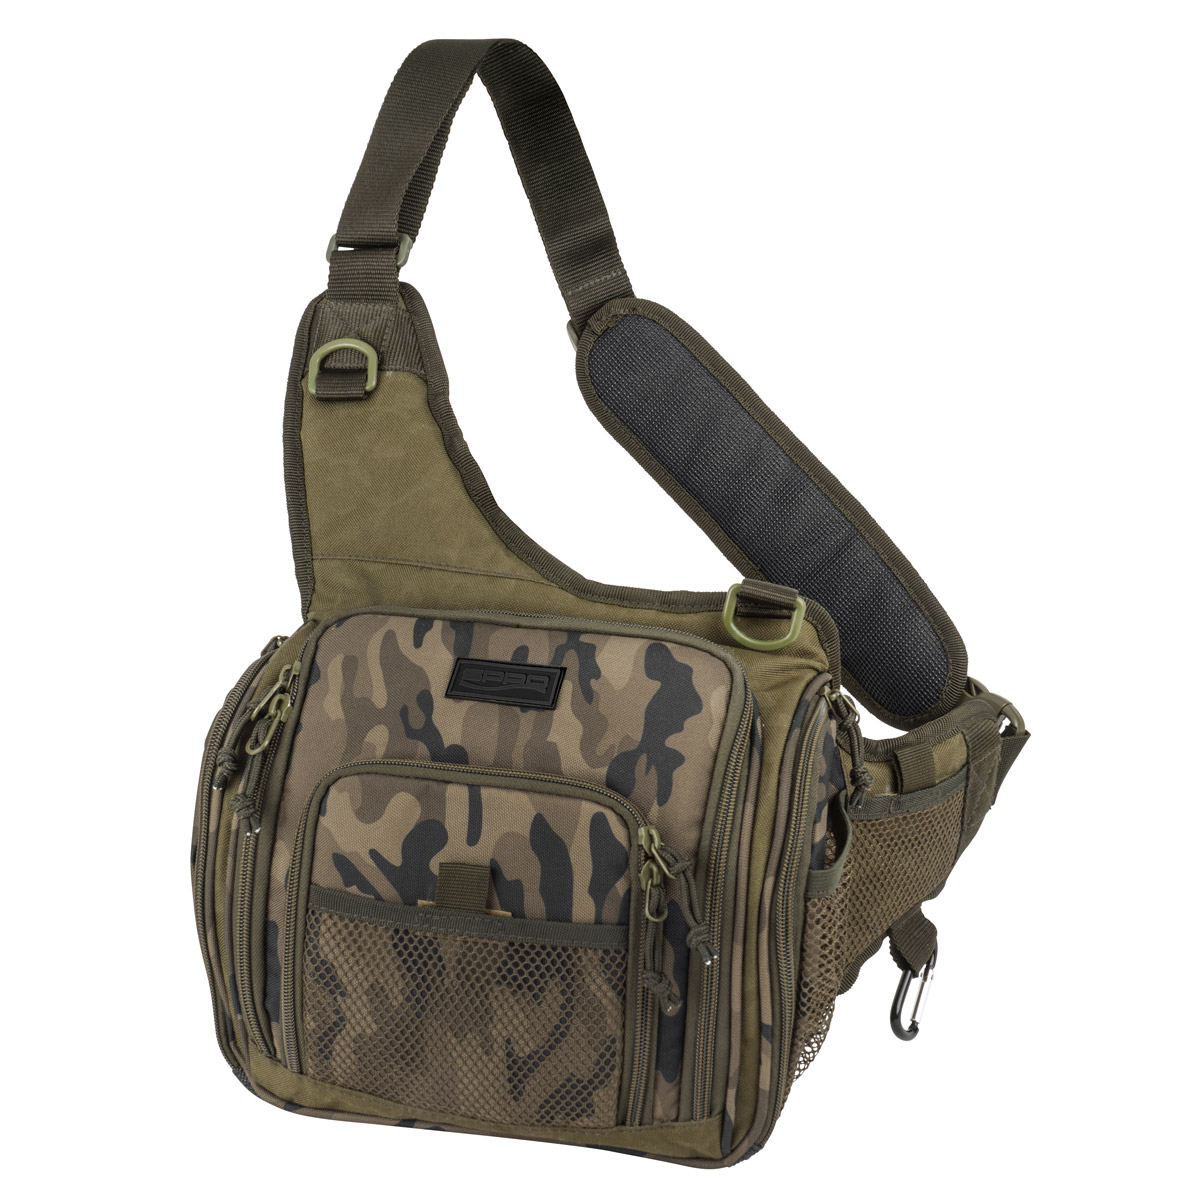 Spro Double Camouflage Shoulderbag